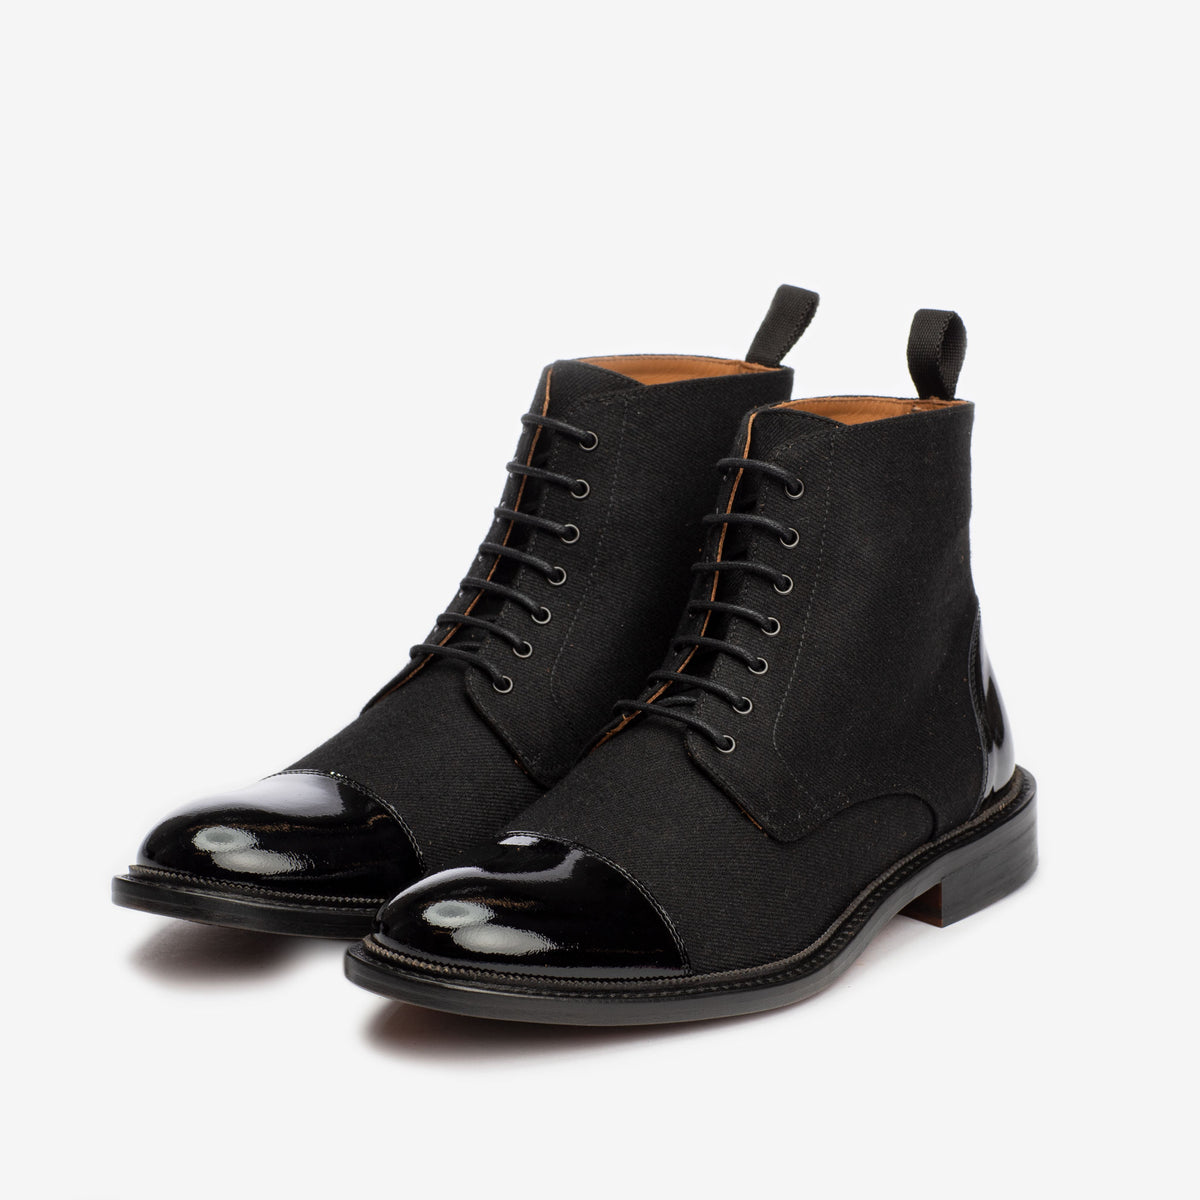 The Jack Boot in Tux - Men's Formal Boots | TAFT